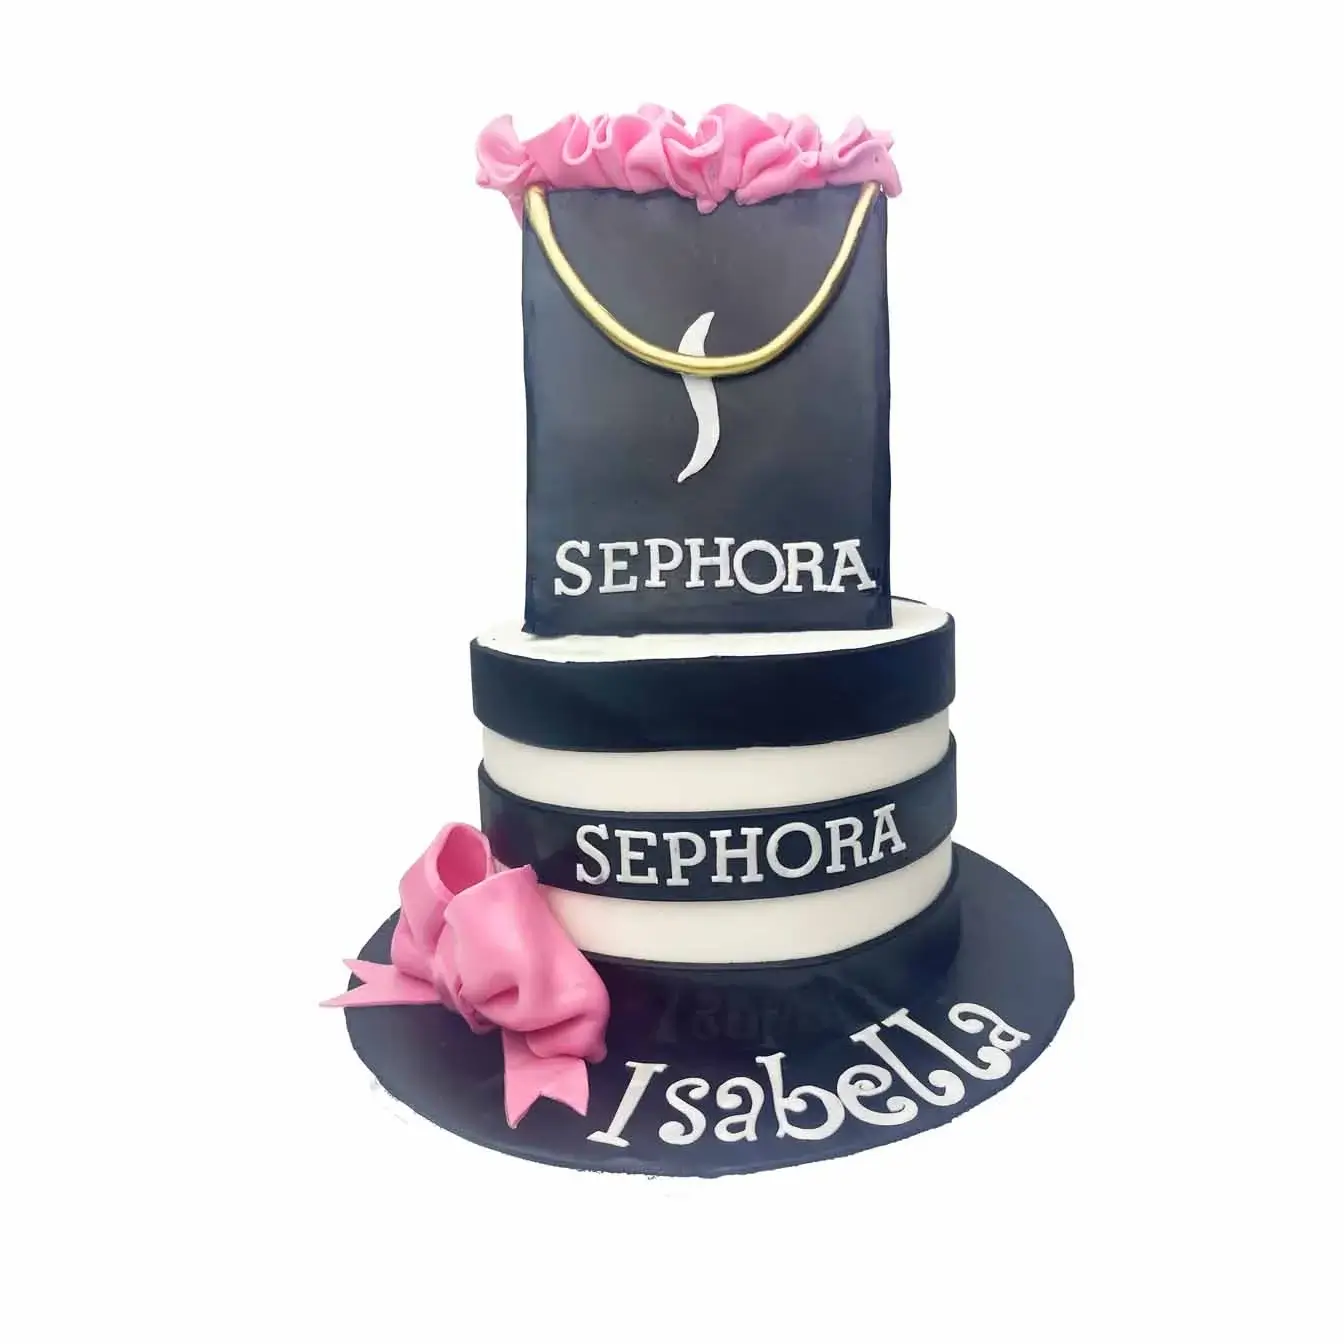 Chic Sephora Gift Bag Cake - A single-tier white fondant cake with black horizontal lines and a meticulously crafted Sephora gift bag topper, a stylish centerpiece for makeup enthusiasts and fashion-forward celebrations.